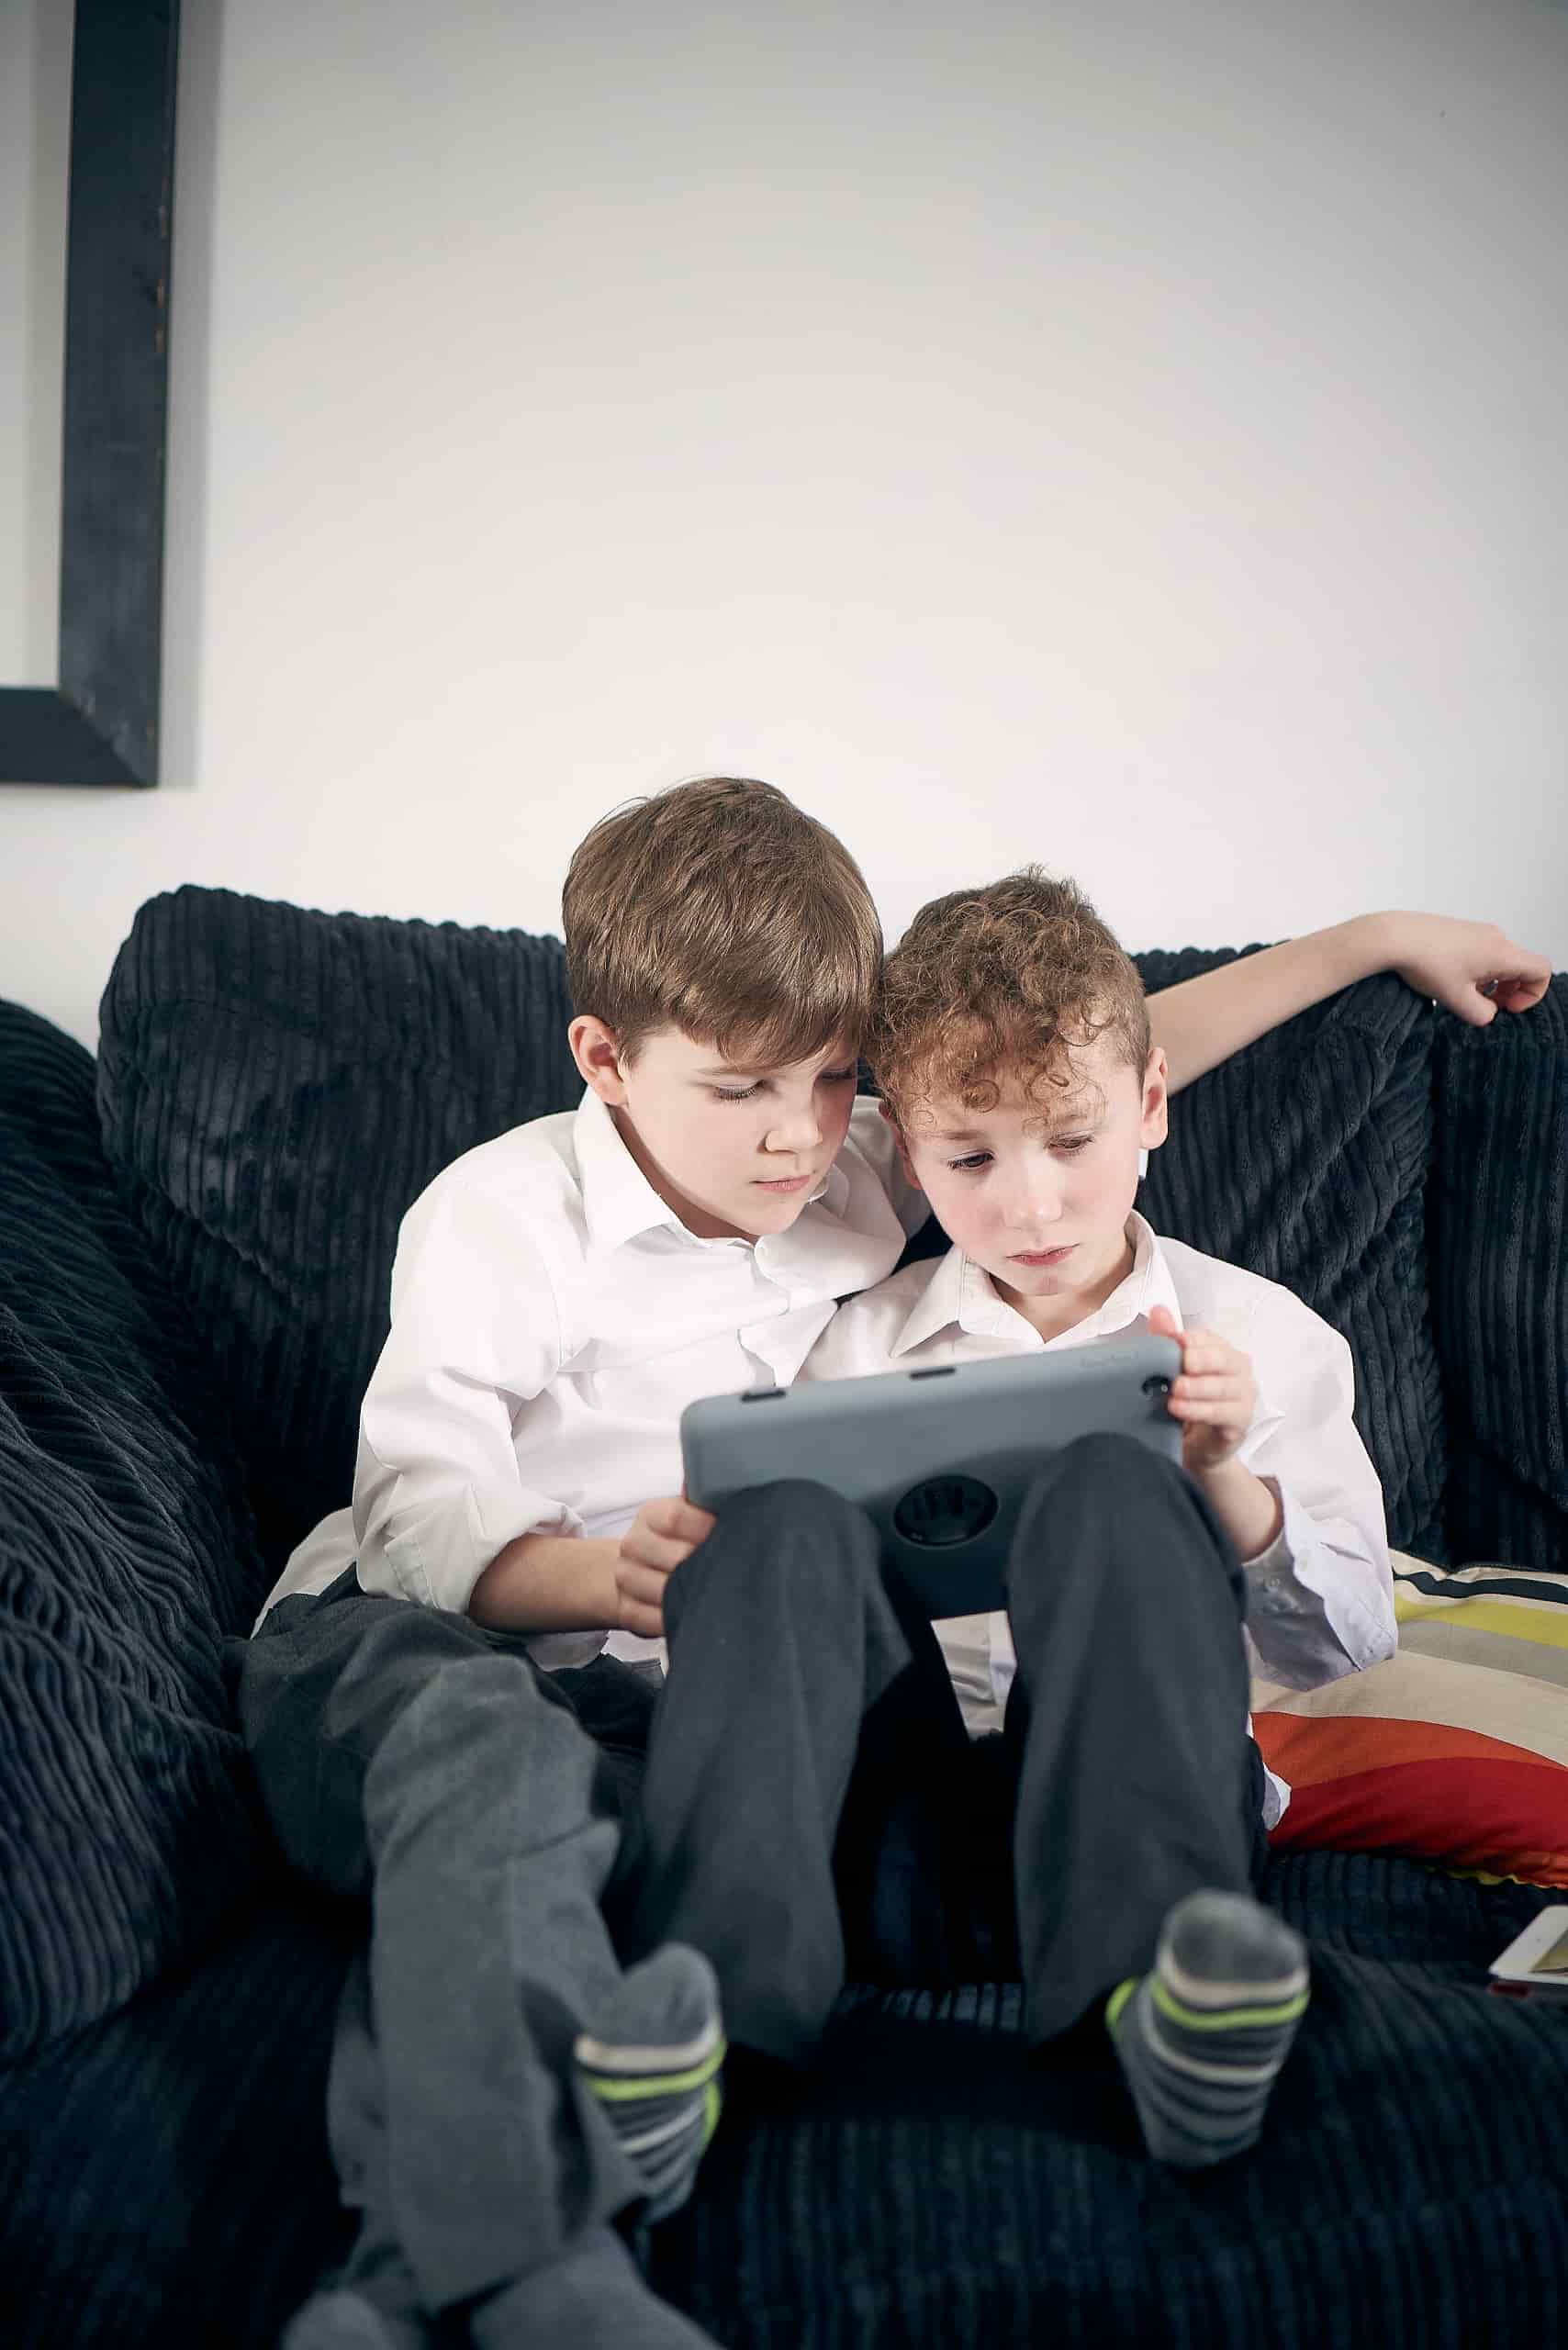 Image of two children sitting next to each other on a sofa looking at an iPad.